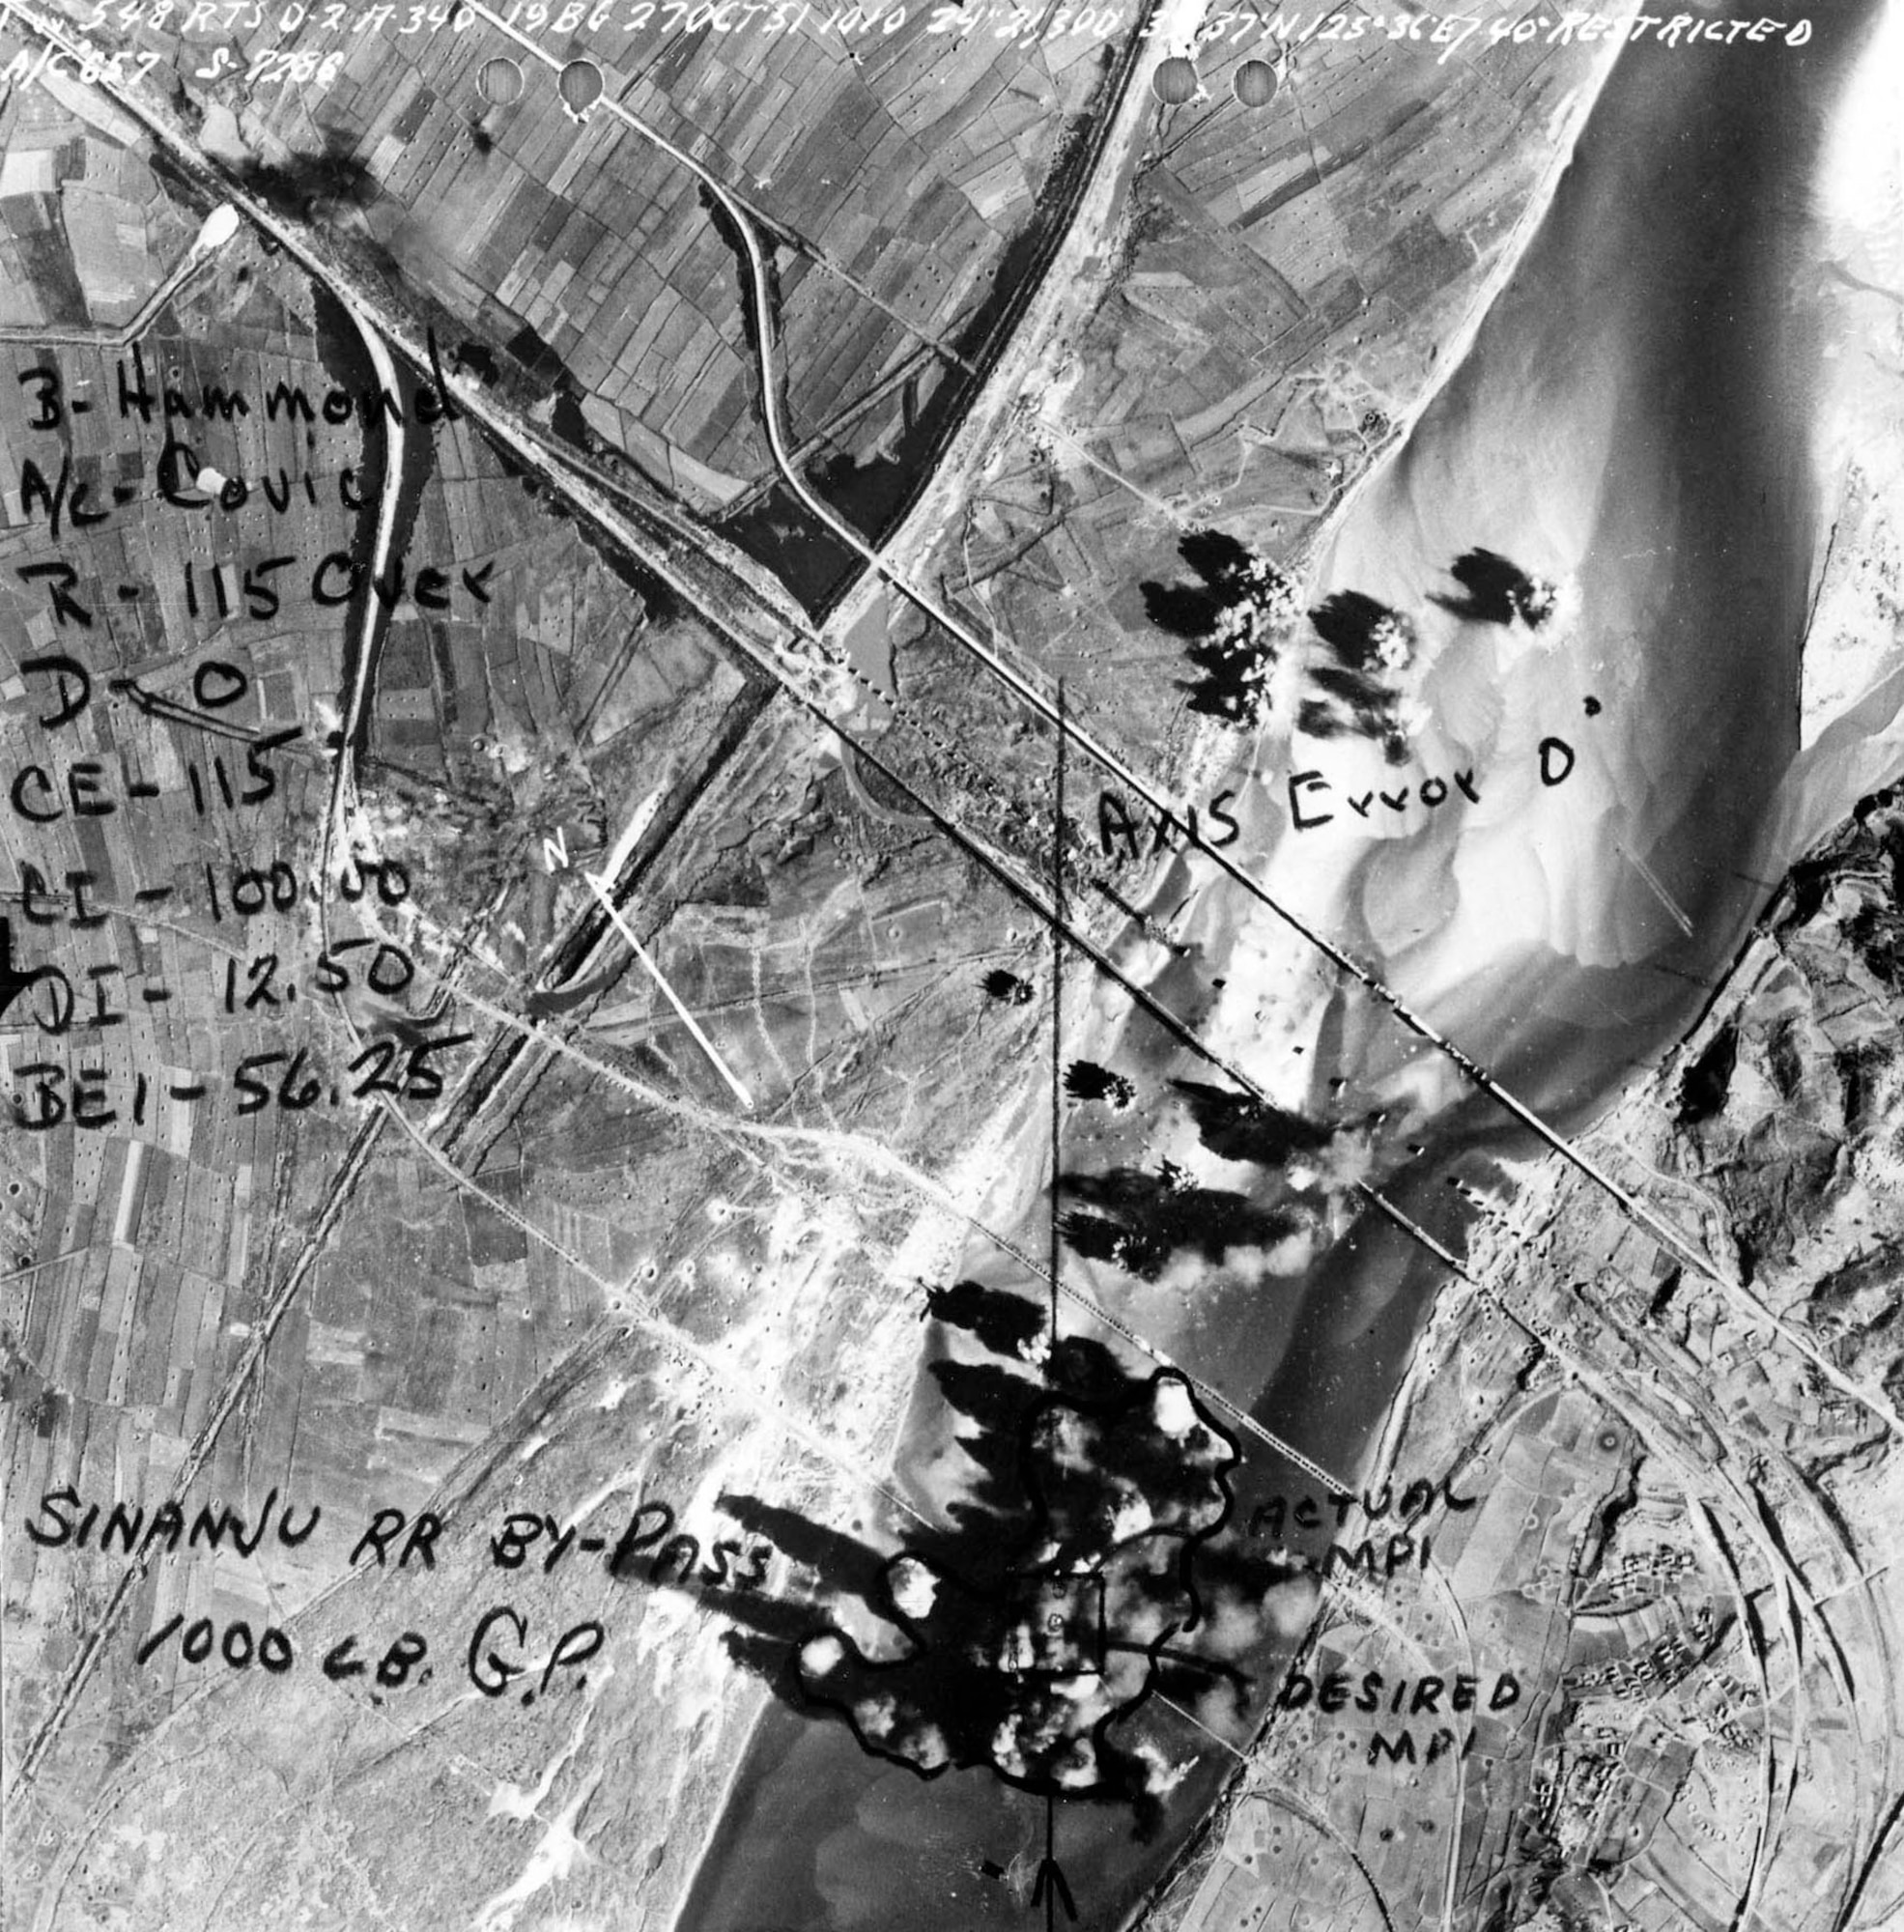 On Oct. 27, 1951, "Command Decision" flew on a strike against rail bridges at Sinanju, North Korea. On this mission, the crew shot down their fourth and fifth MiG-15 (they shot down the other three on Oct. 17). This is the strike photo taken on the Oct. 27 mission. (U.S. Air Force photo)